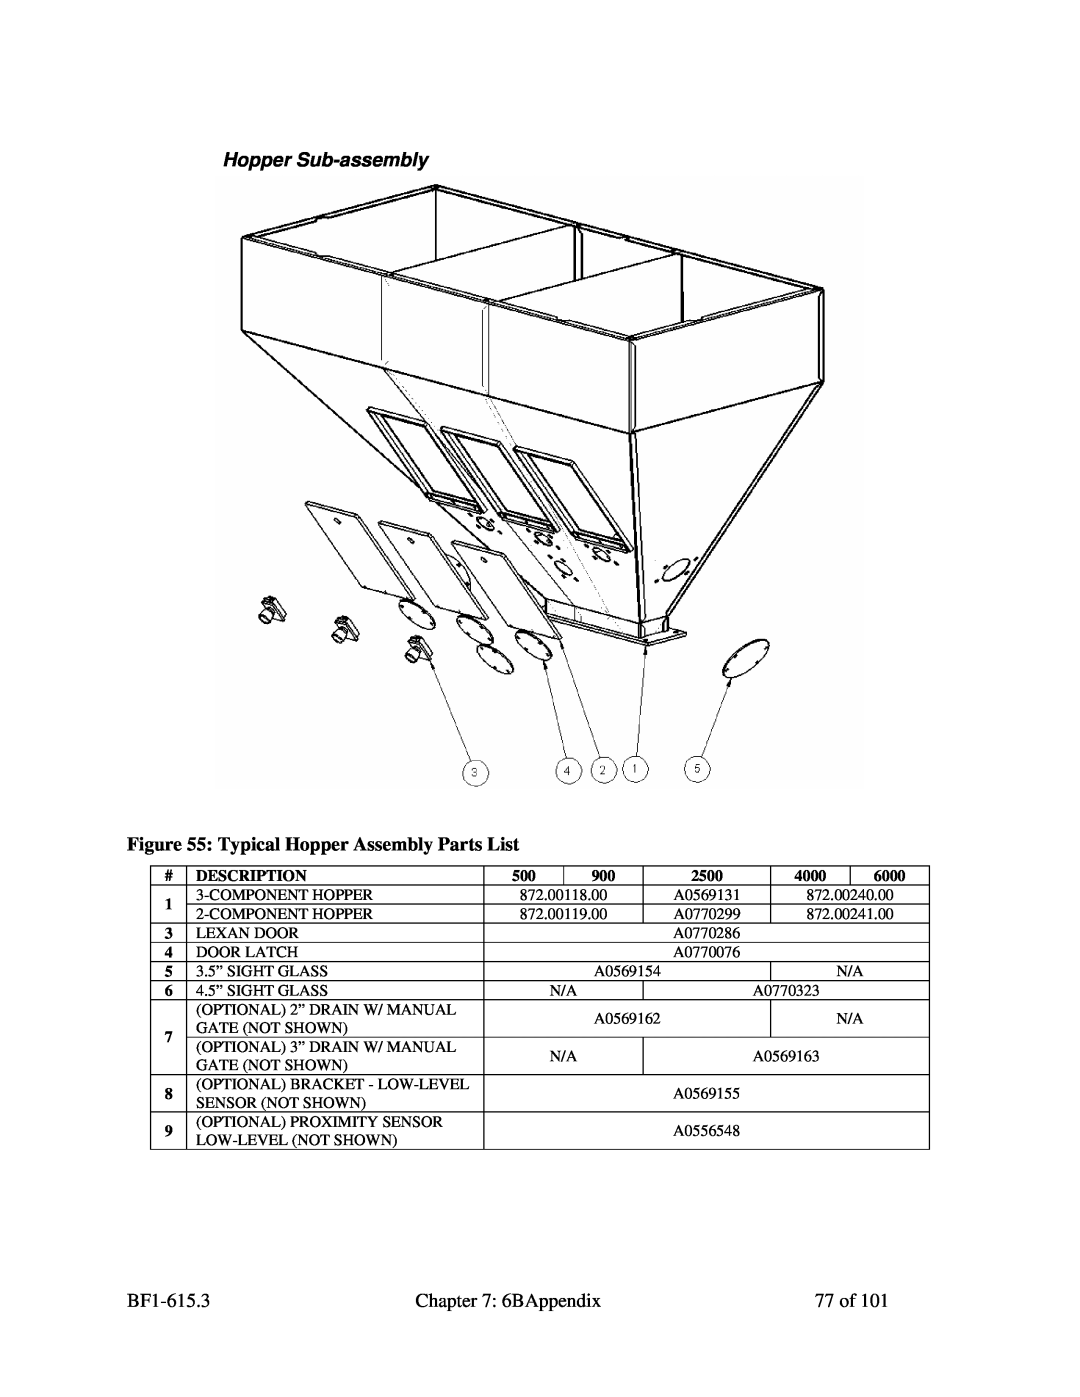 Mitsubishi Electronics 882.00273.00 specifications Hopper Sub-assembly, Typical Hopper Assembly Parts List 